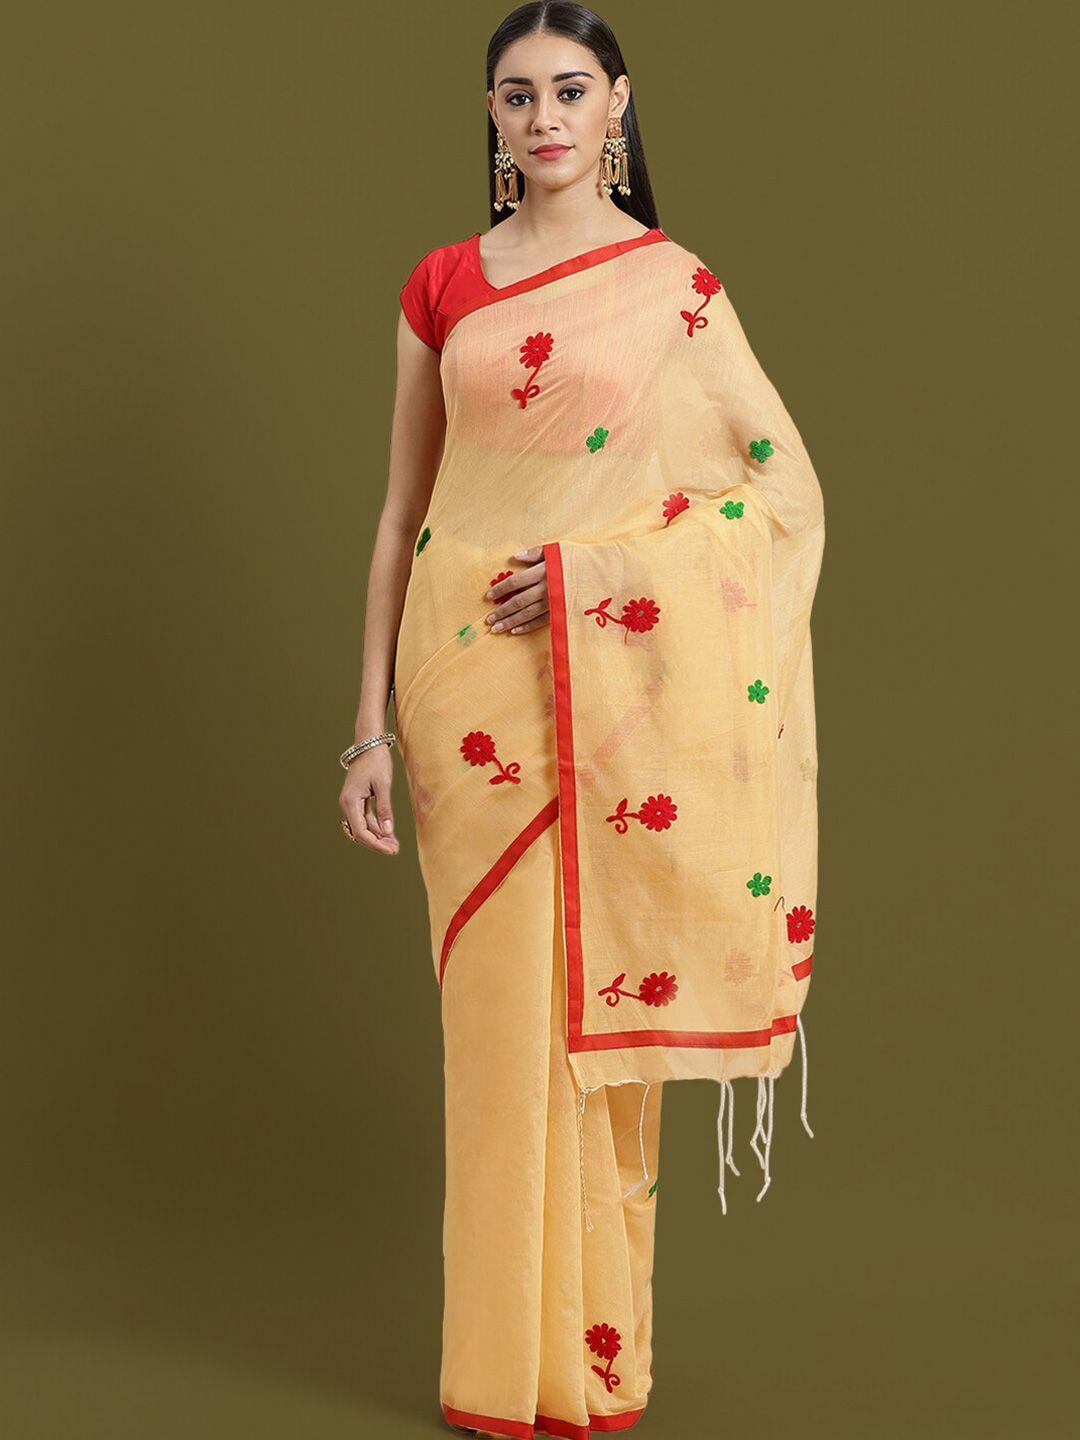 house of arli floral embroidered saree